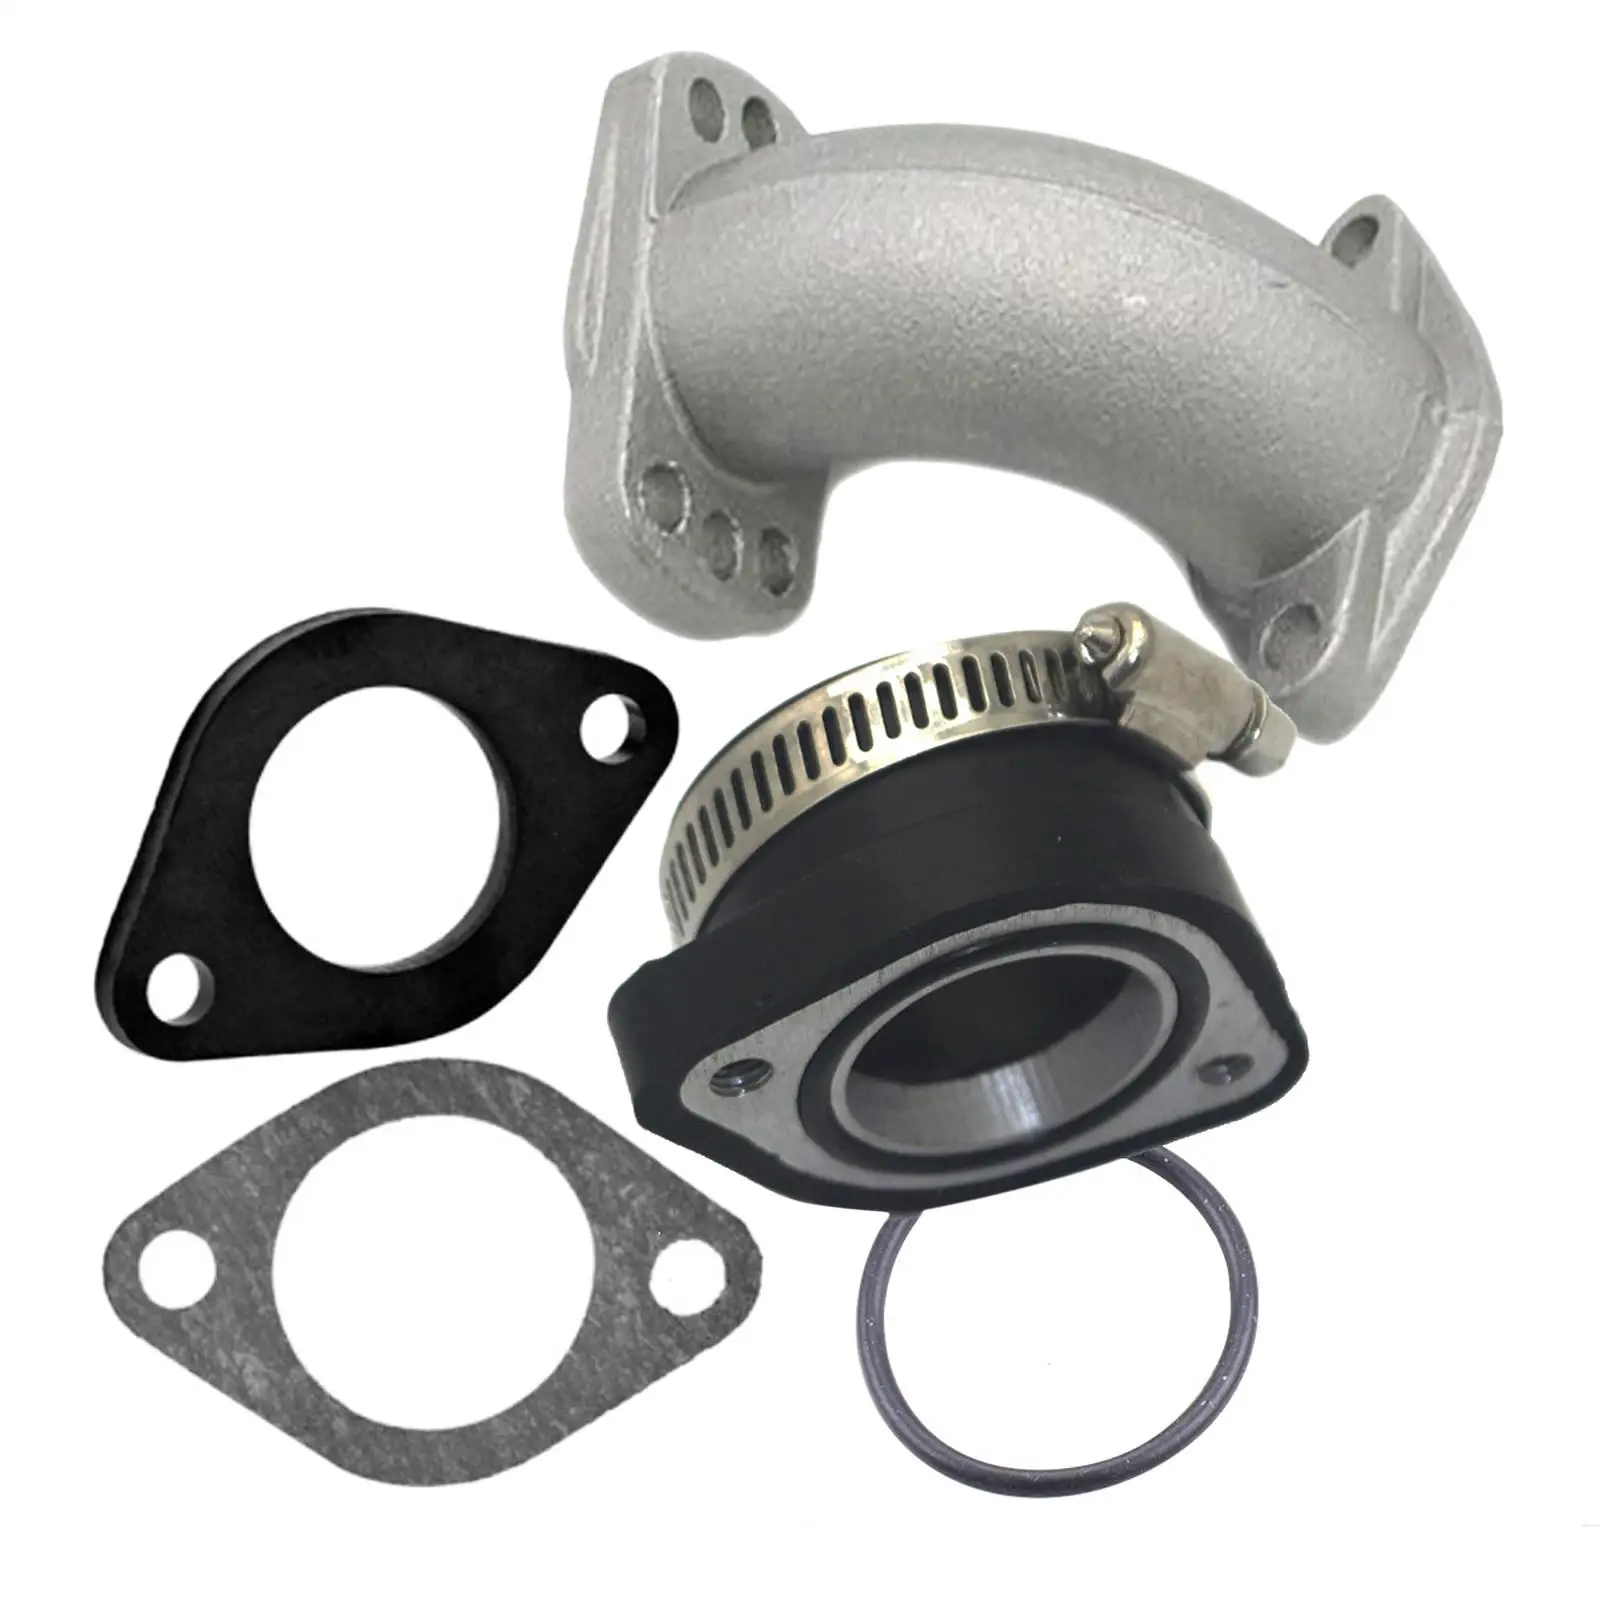 Manifold Flange & Gasket Set Accessories Carburetor Intake Adapter Boot Rubber Pipe Fit for Mikuni Vm24 ATV Moped Scooter